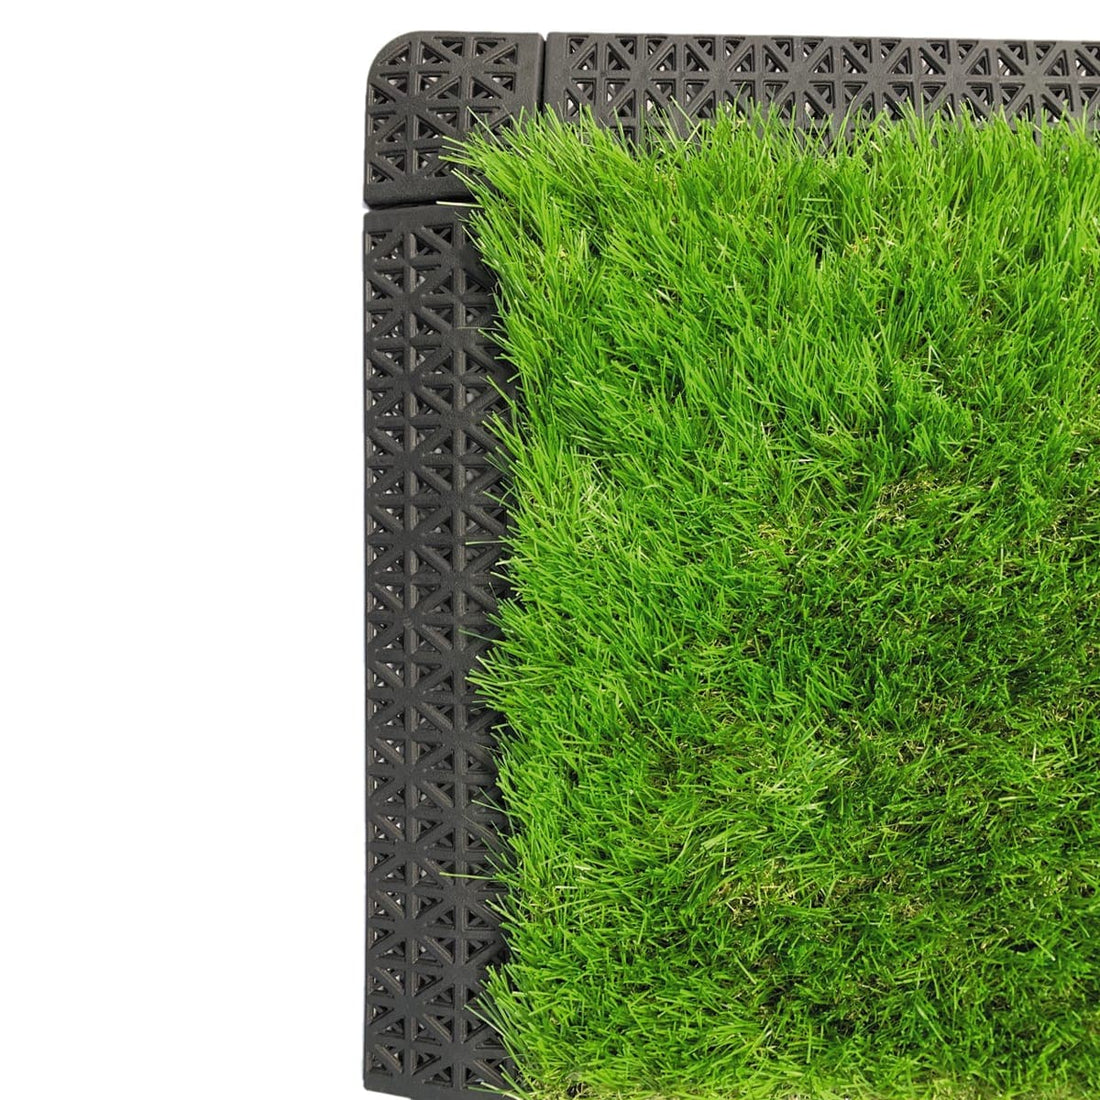 KIT 6 EDGING AND 2 ANGLES FOR ARTIFICIAL TURF TILES - best price from Maltashopper.com BR500010789